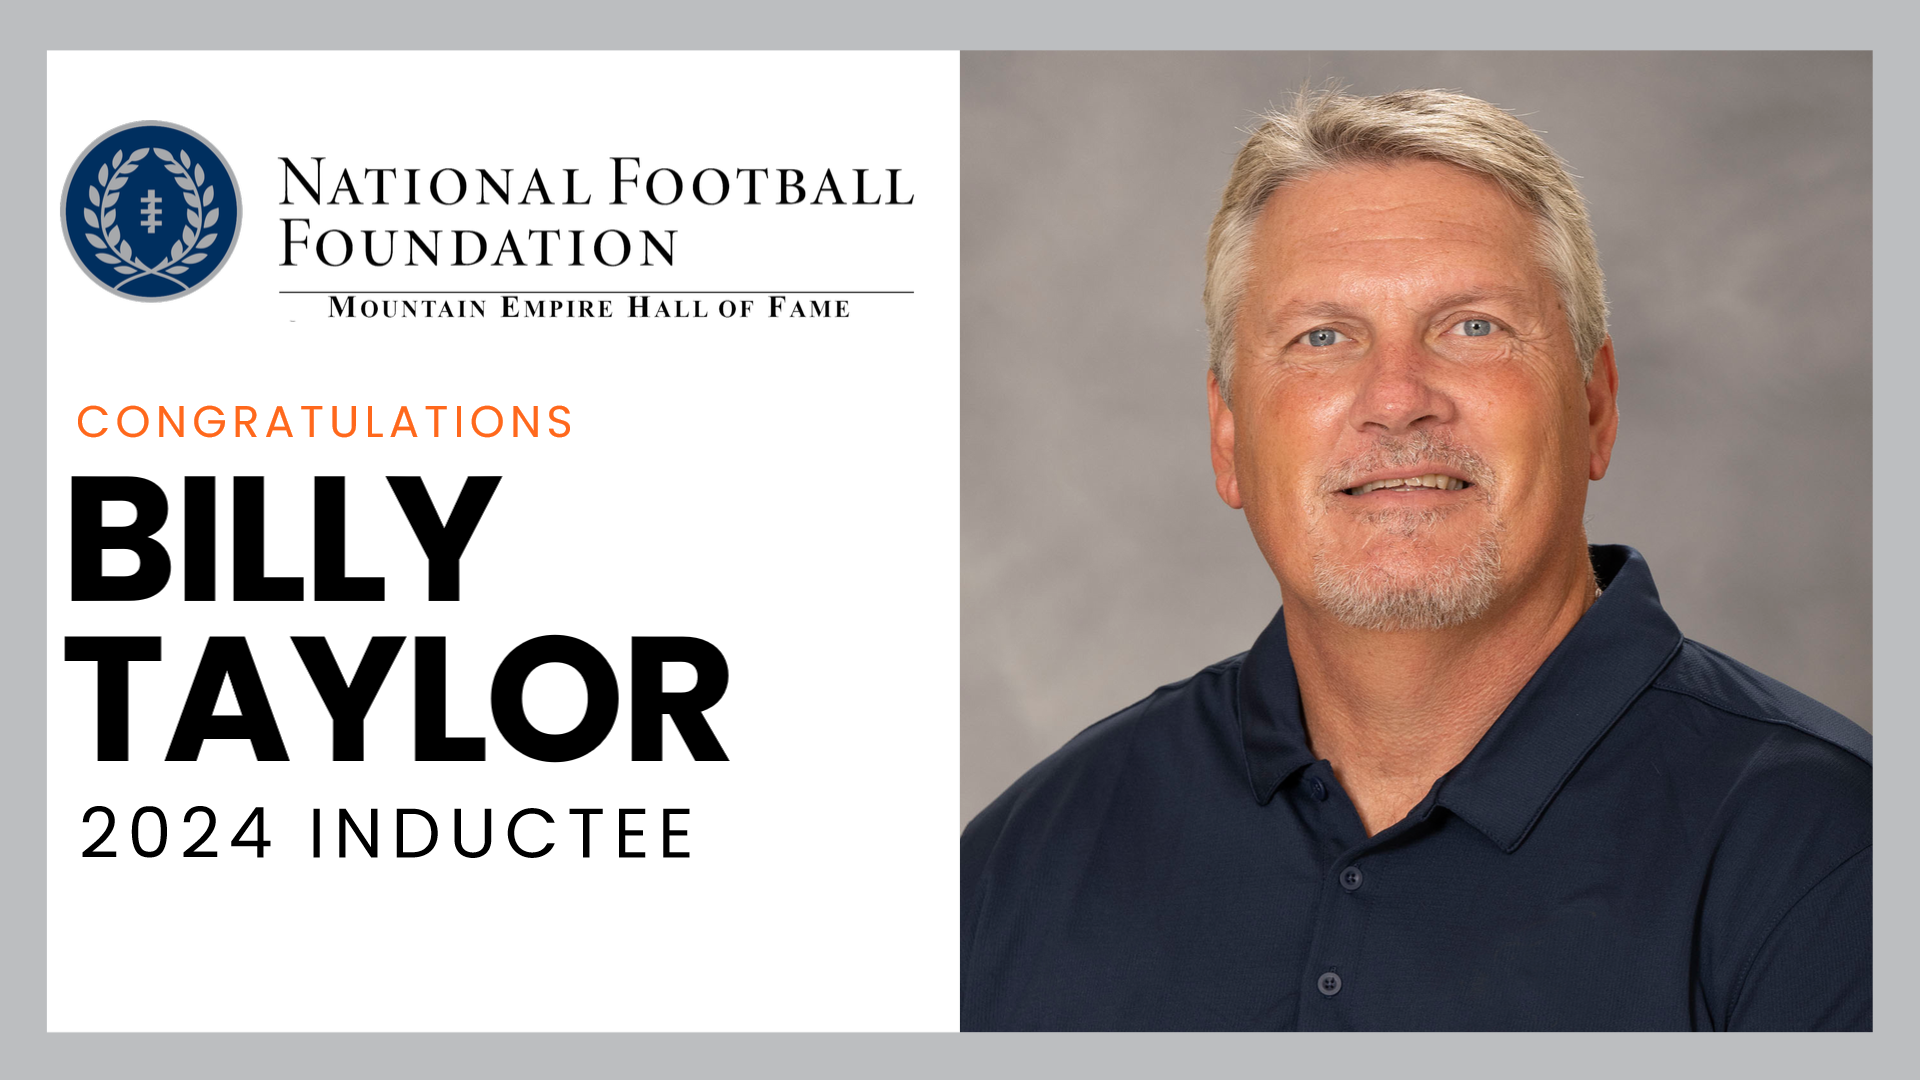 Taylor to be inducted to NFF Mountain Empire Hall of Fame